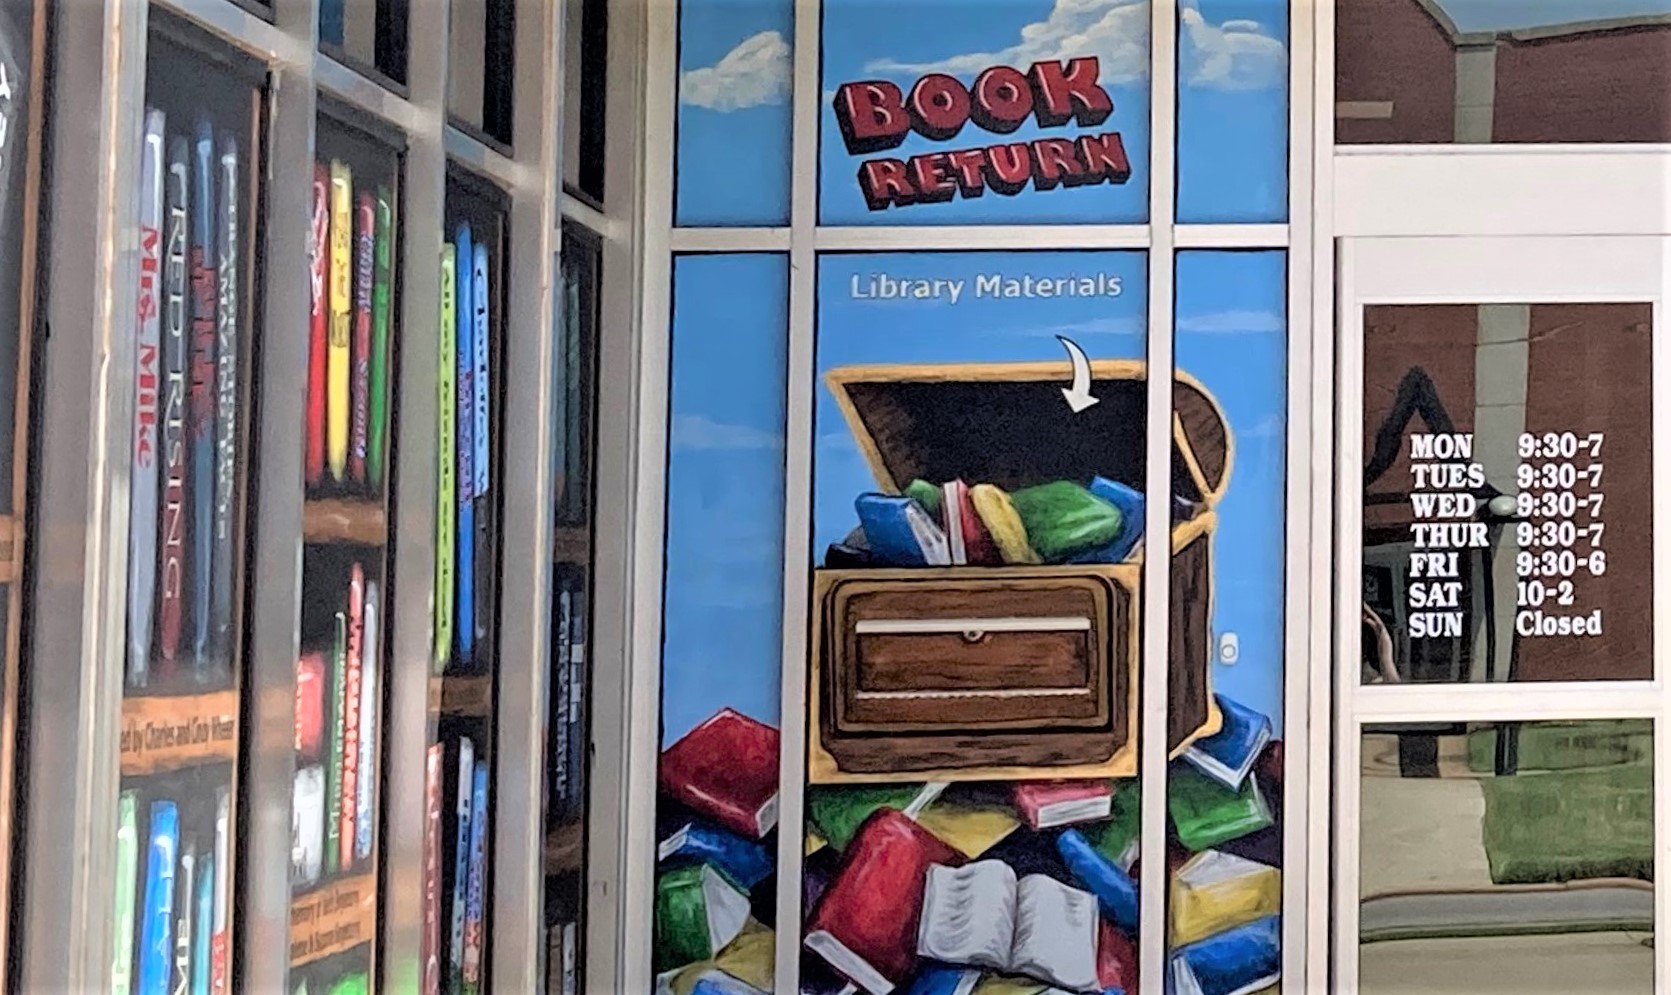 Image: Photo of the book return by the front door of the library with hours of operation visible on the doors.